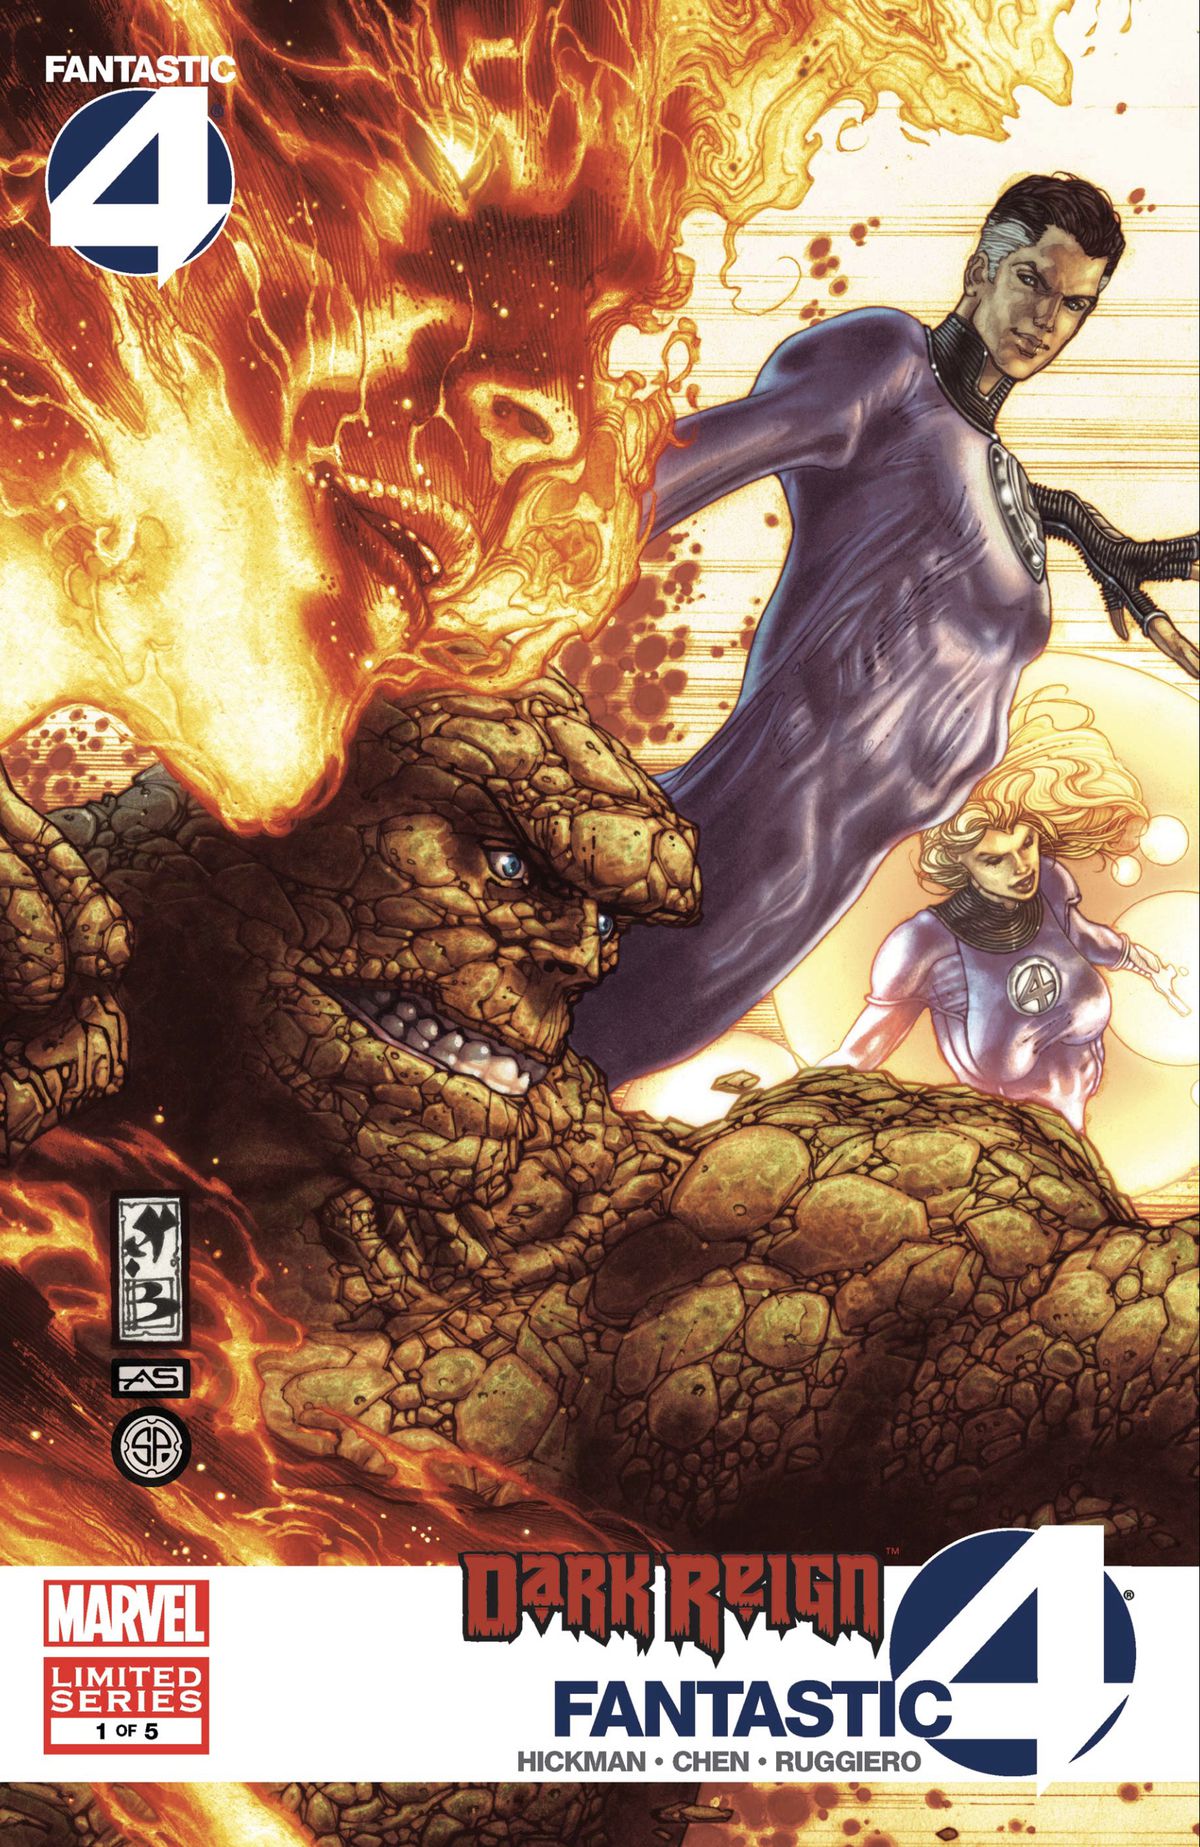 The Fantastic Four pose dramatically on the cover of Dark Reign: Fantastic Four #1 (2009).